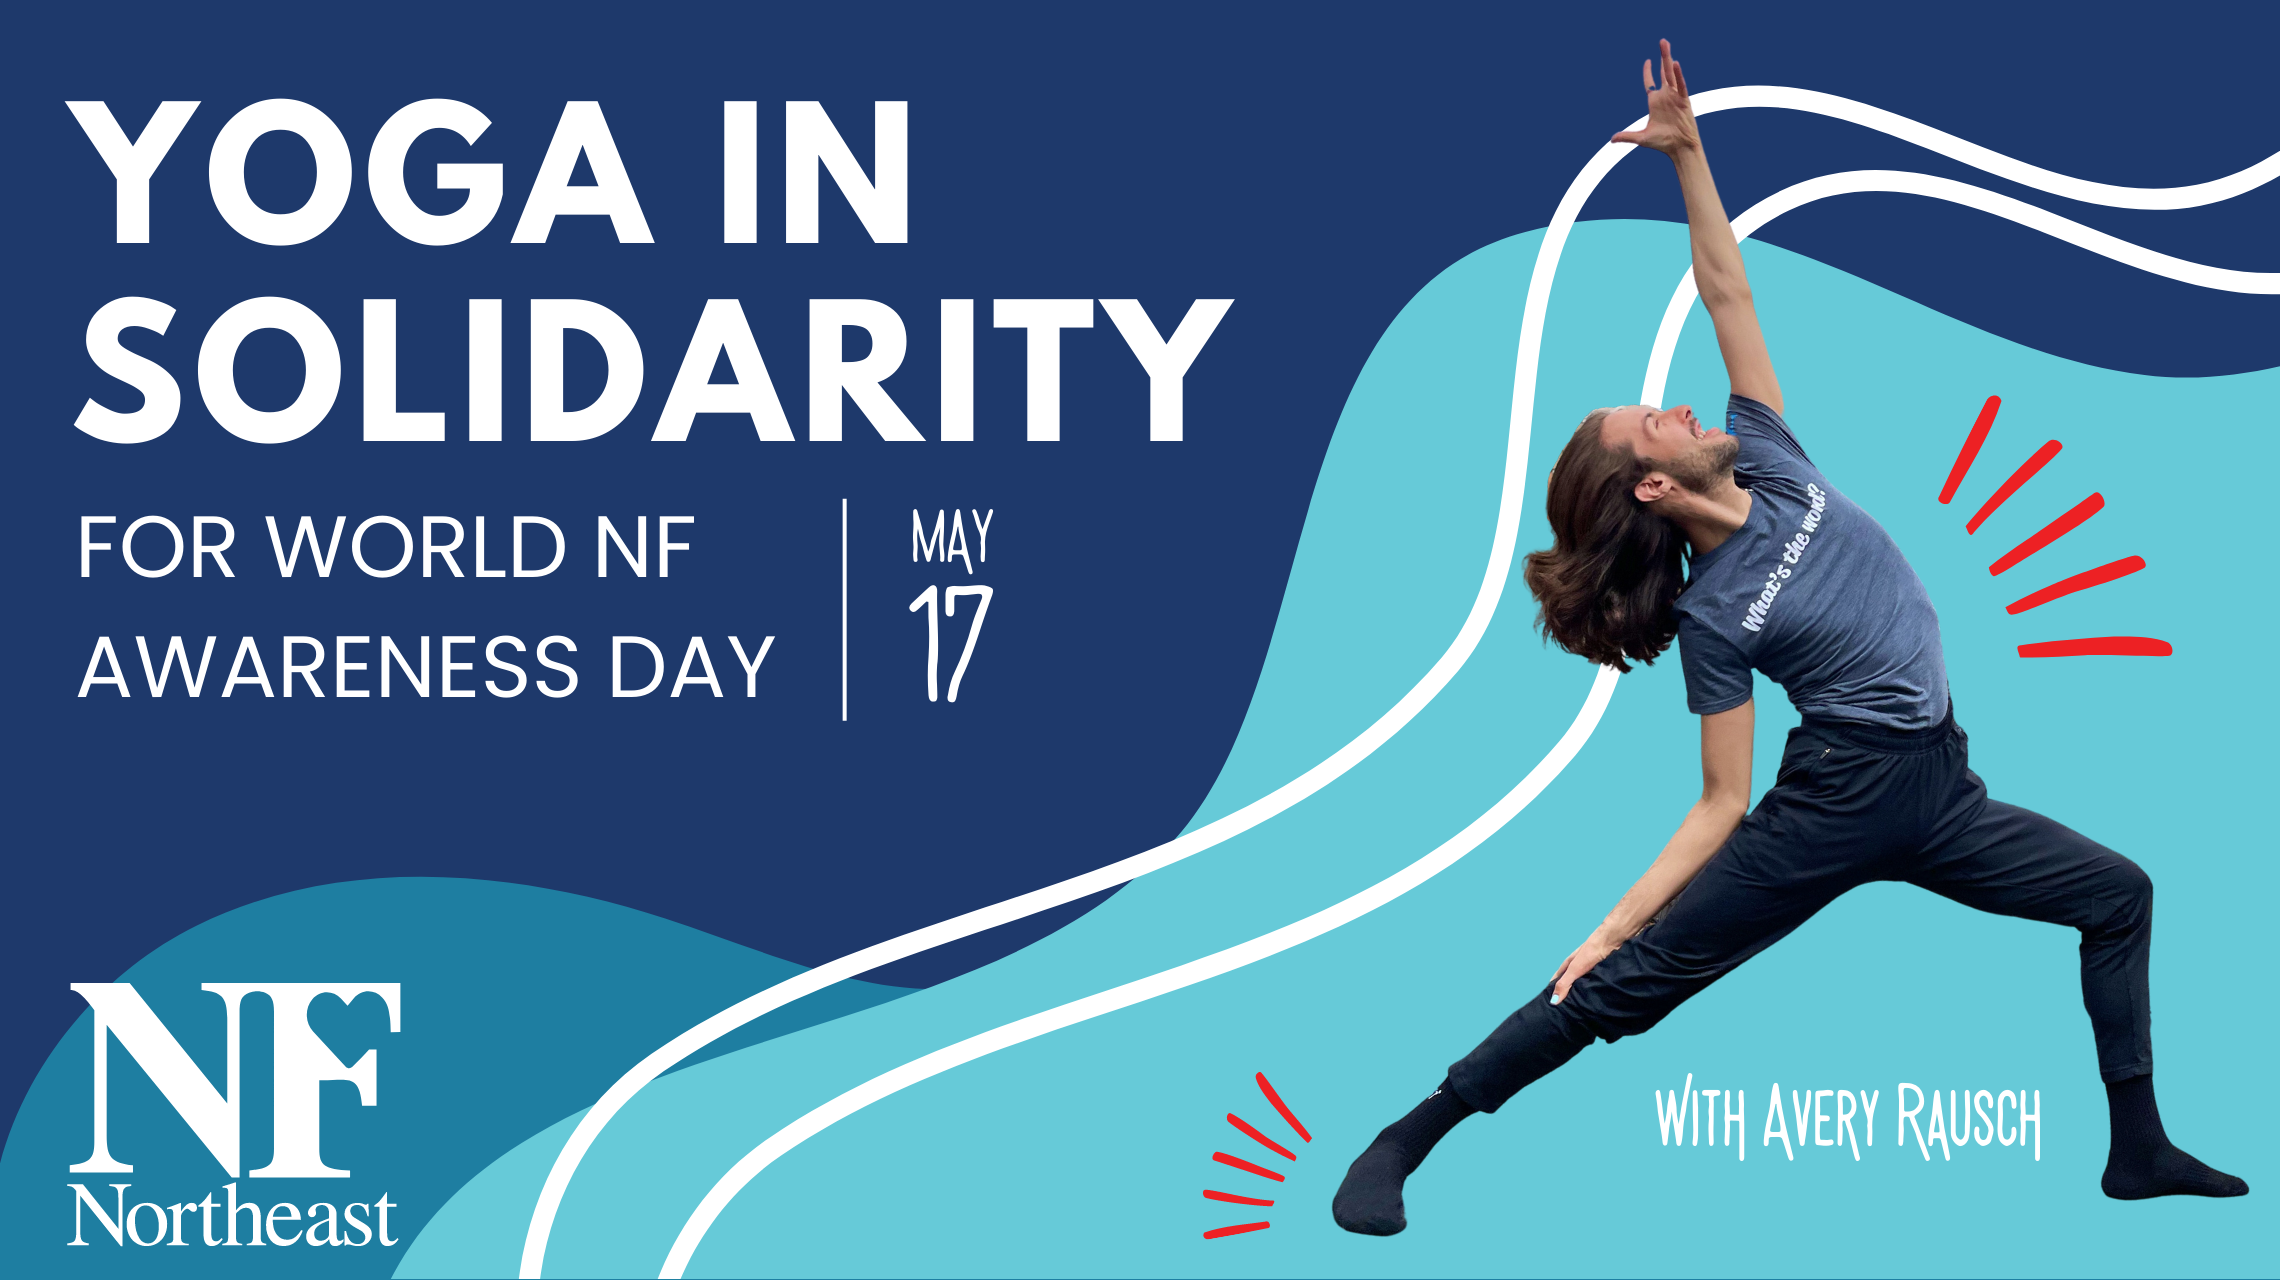 Graphic for "Yoga in Solidarity" event with image of young man in yoga pose